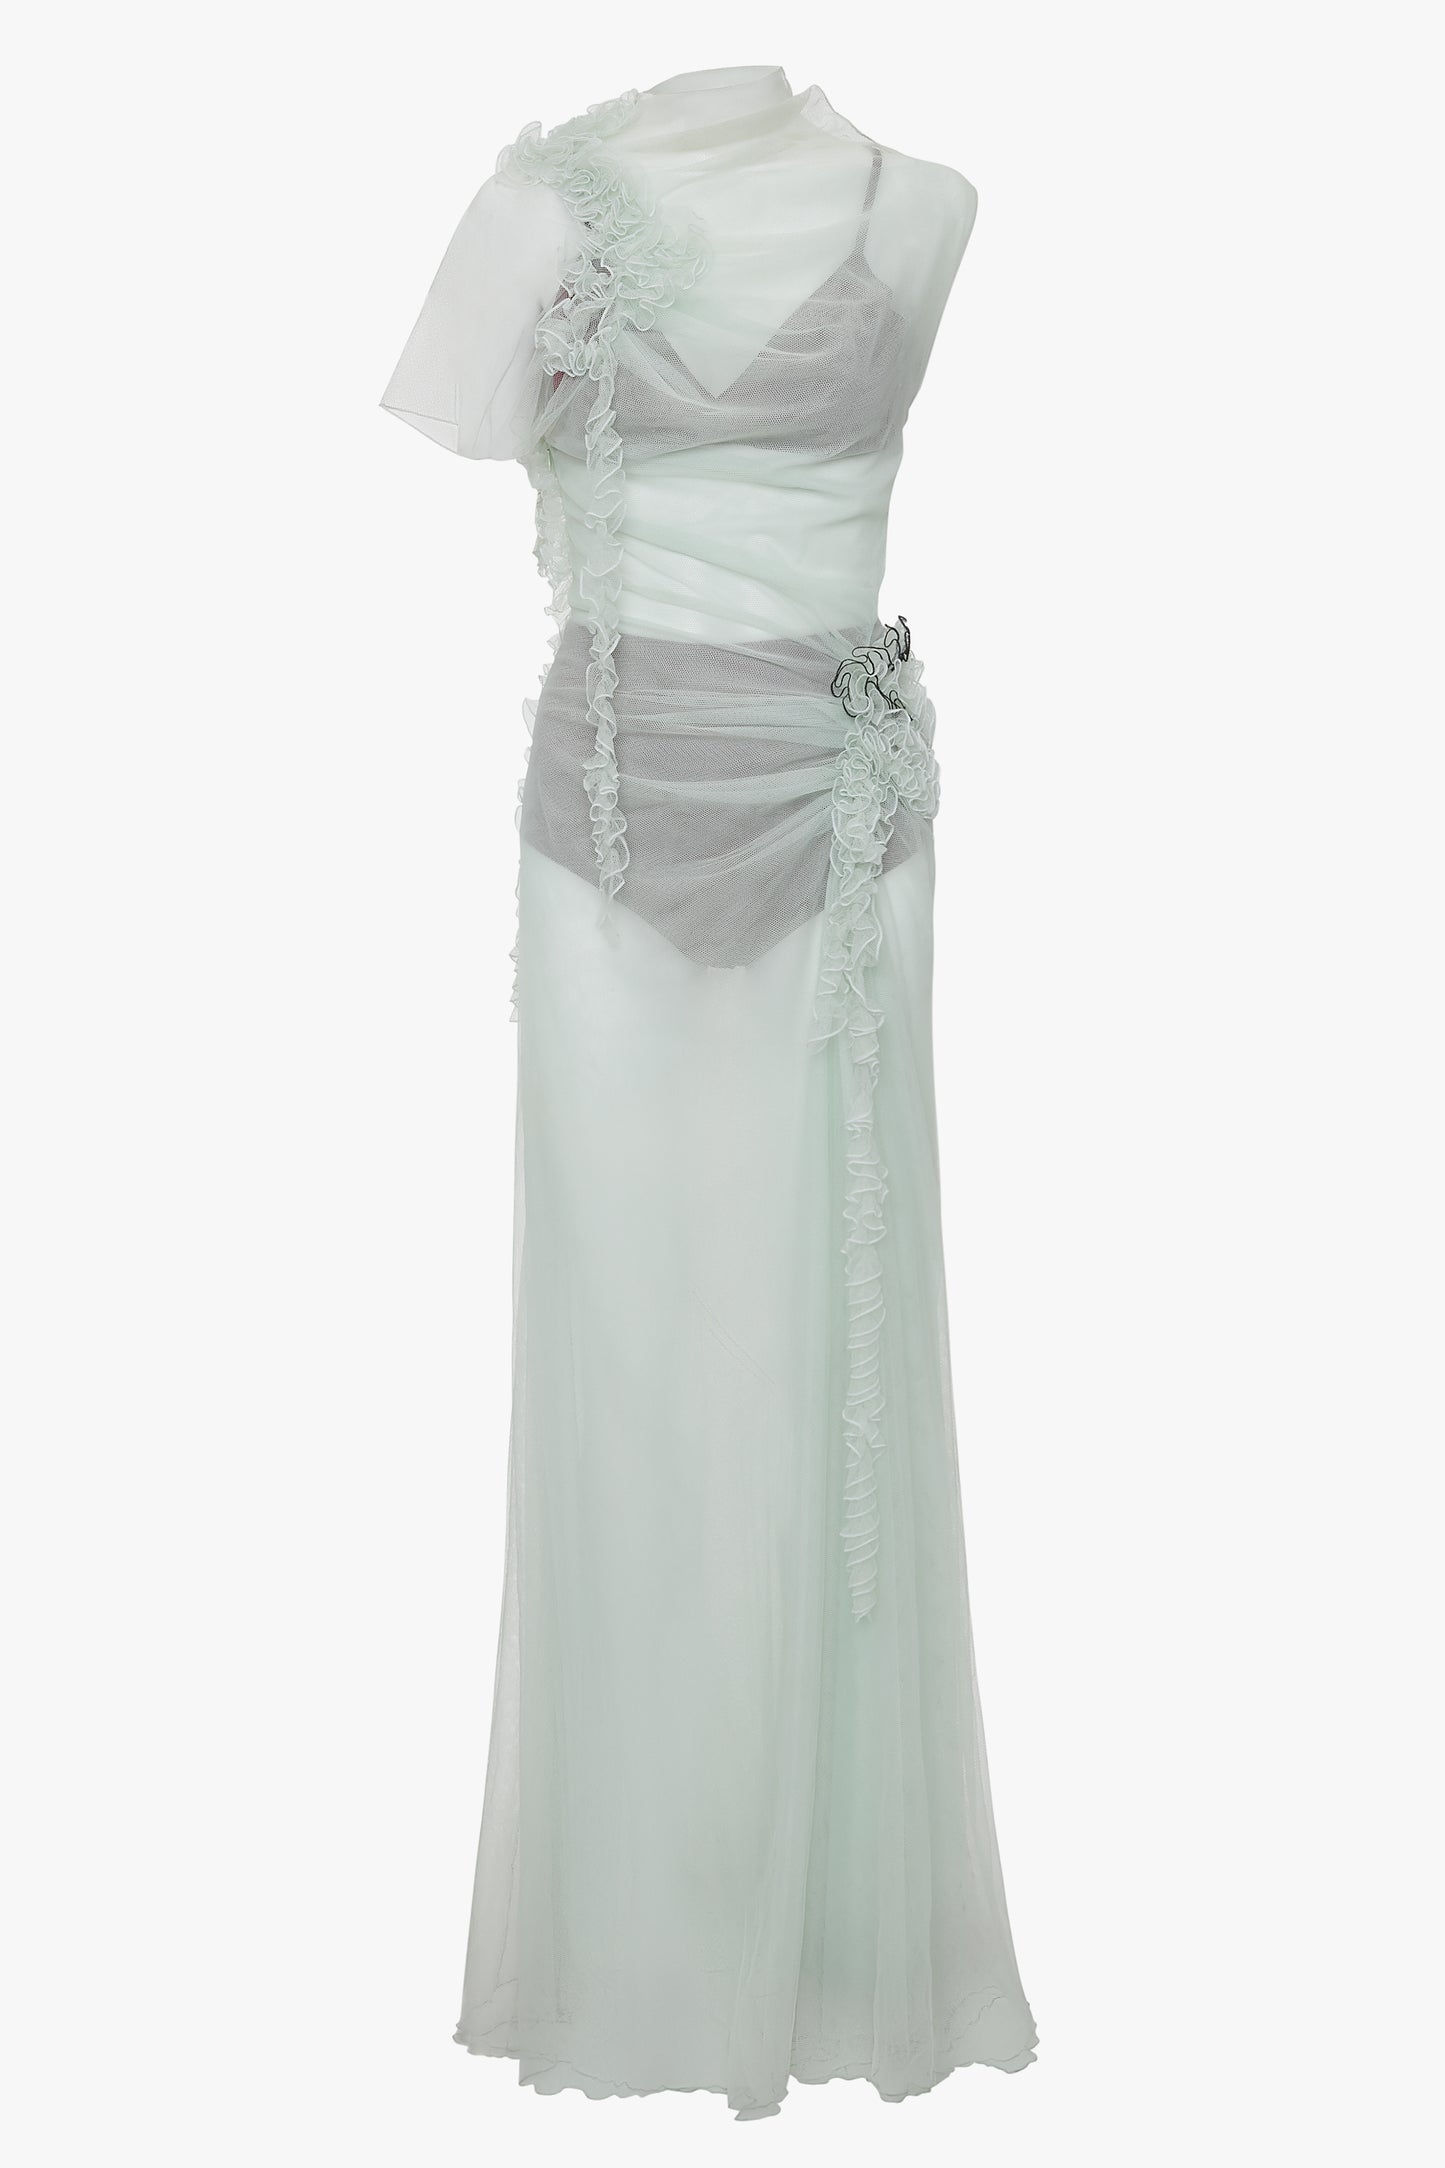 A Gathered Tulle Detail Floor-Length Dress In Jade with delicate ruffles and sheer fabric overlaying a slip, featuring asymmetrical design elements and a decorative floral accent at the waist. This ethereal gown can be found on VictoriaBeckham.com.